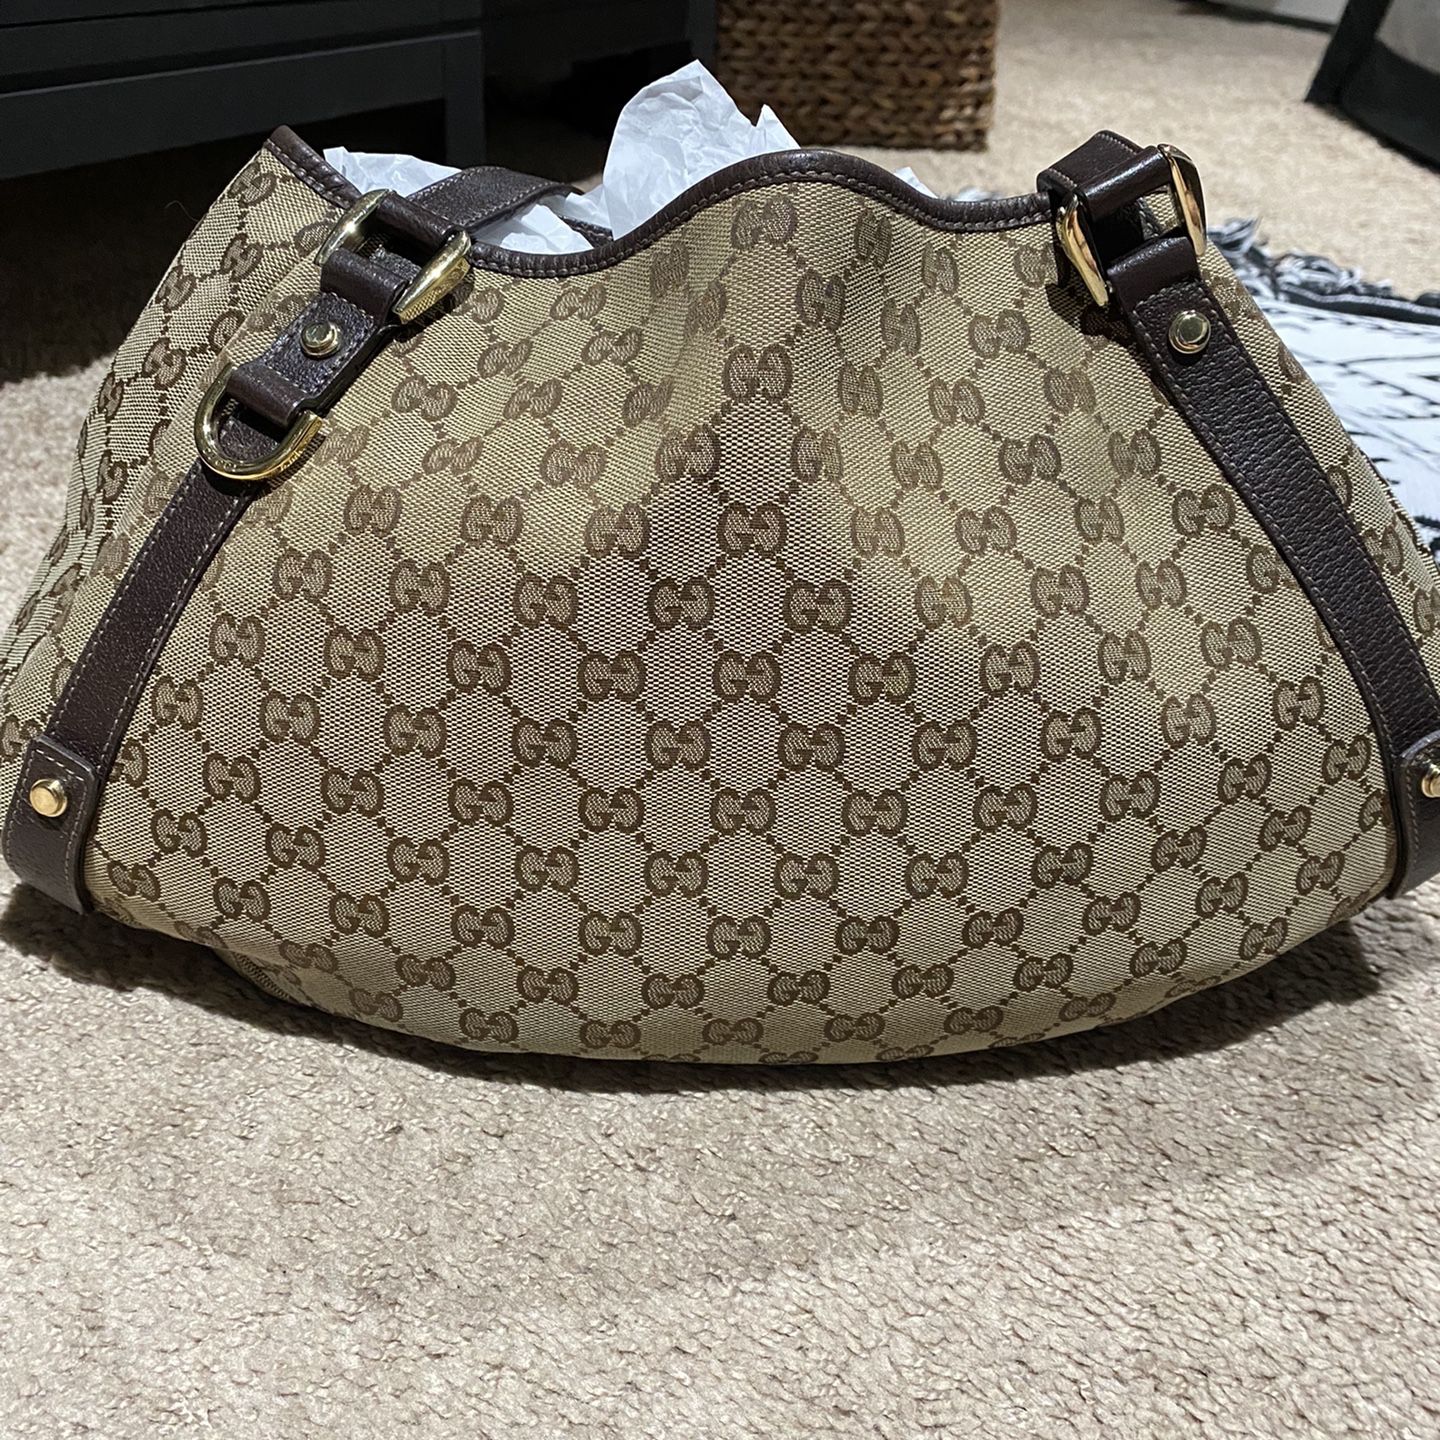 100% authentic Gucci 500 GG monogram supreme backpack bag for Sale in San  Antonio, TX - OfferUp